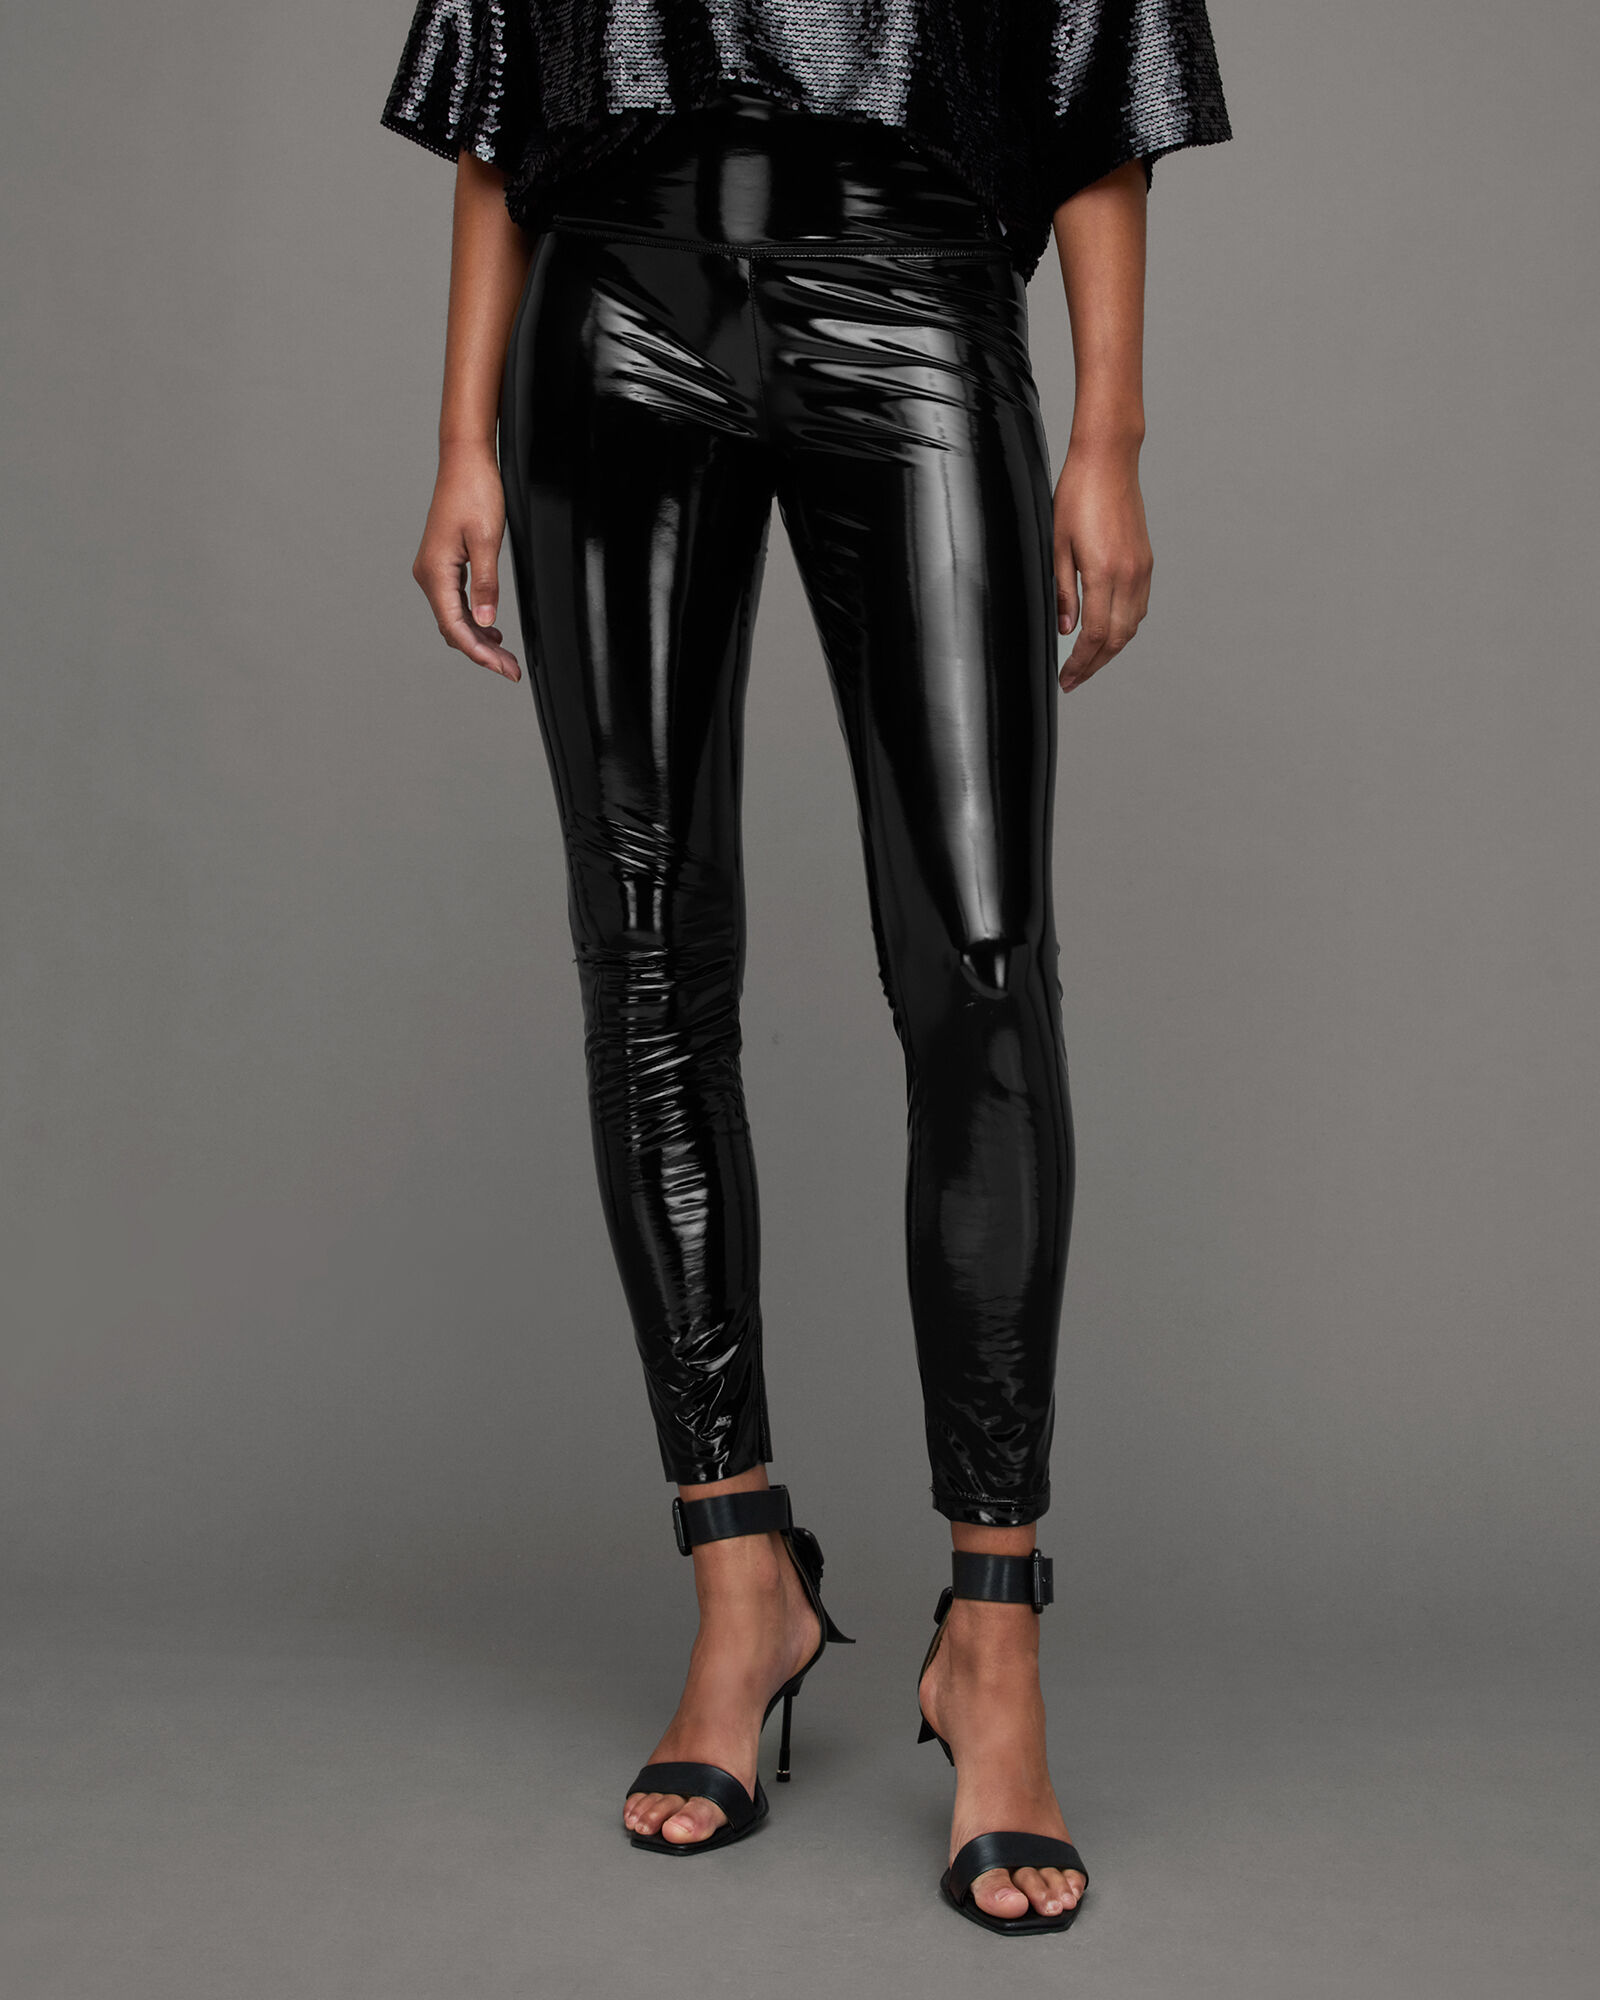 Buy Lipsy Black High Waist Leather Look Leggings from Next India